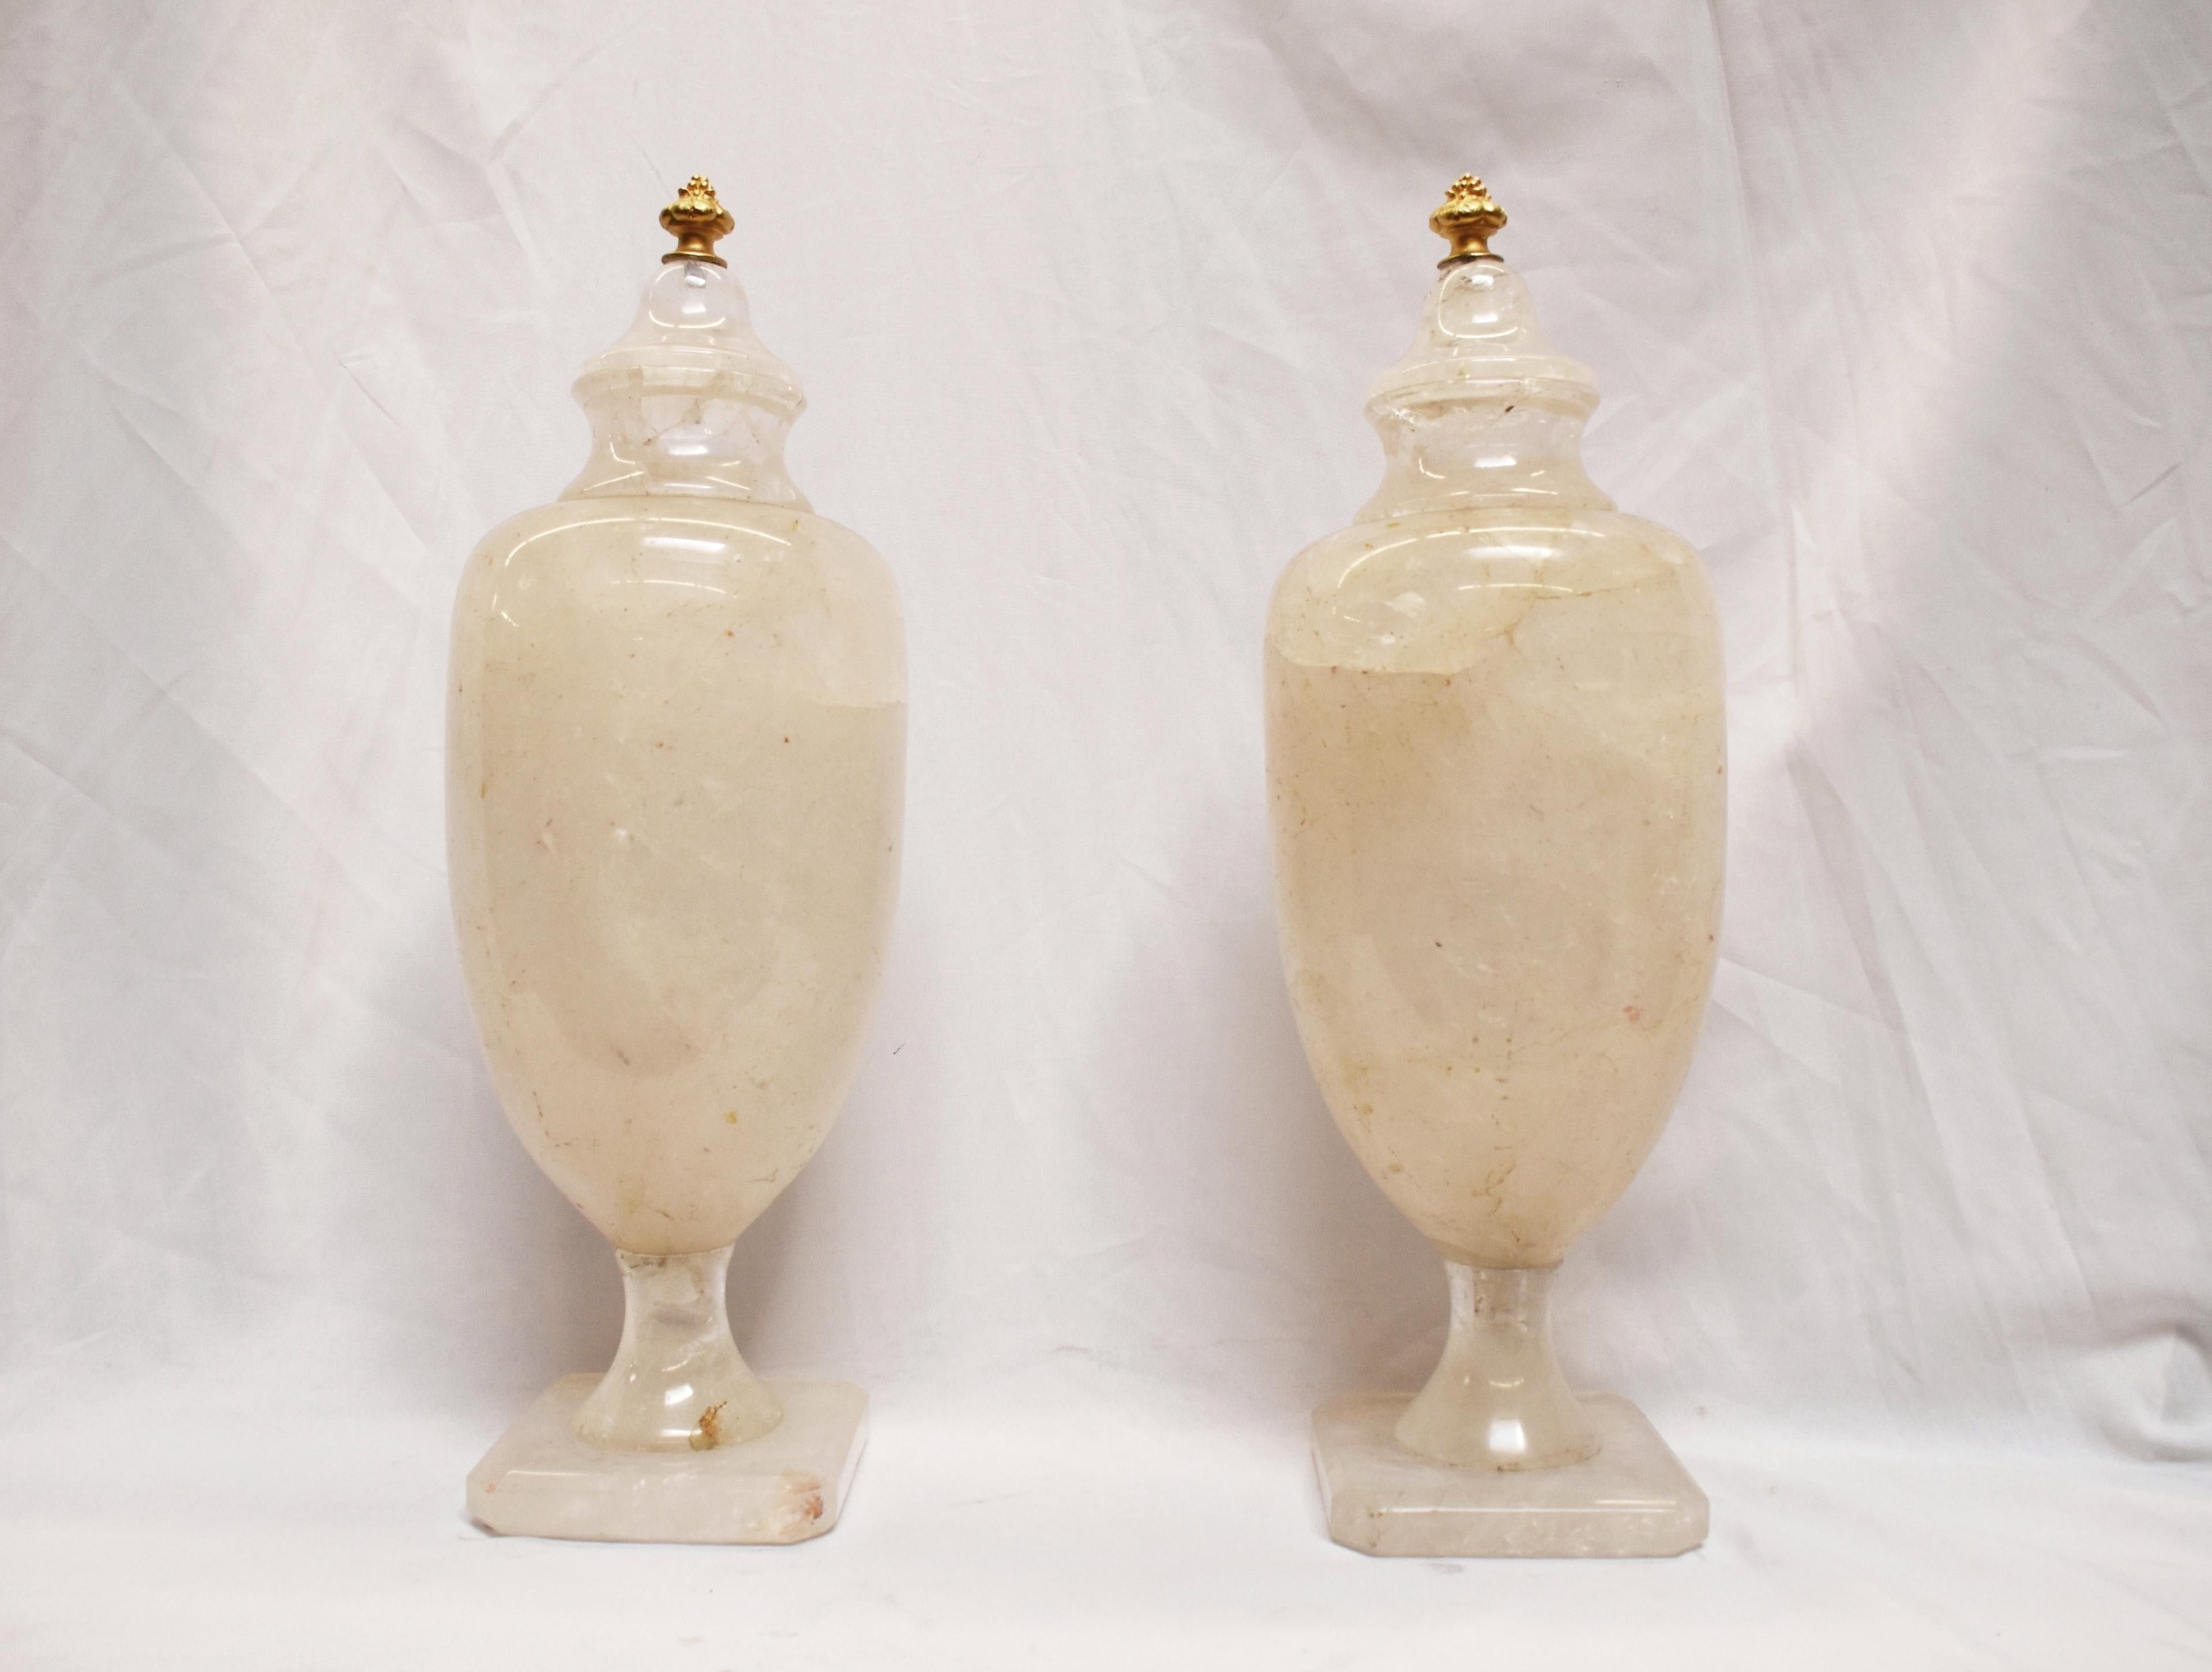 Neoclassical Pair of Rock Crystal Urns with Gold Finials